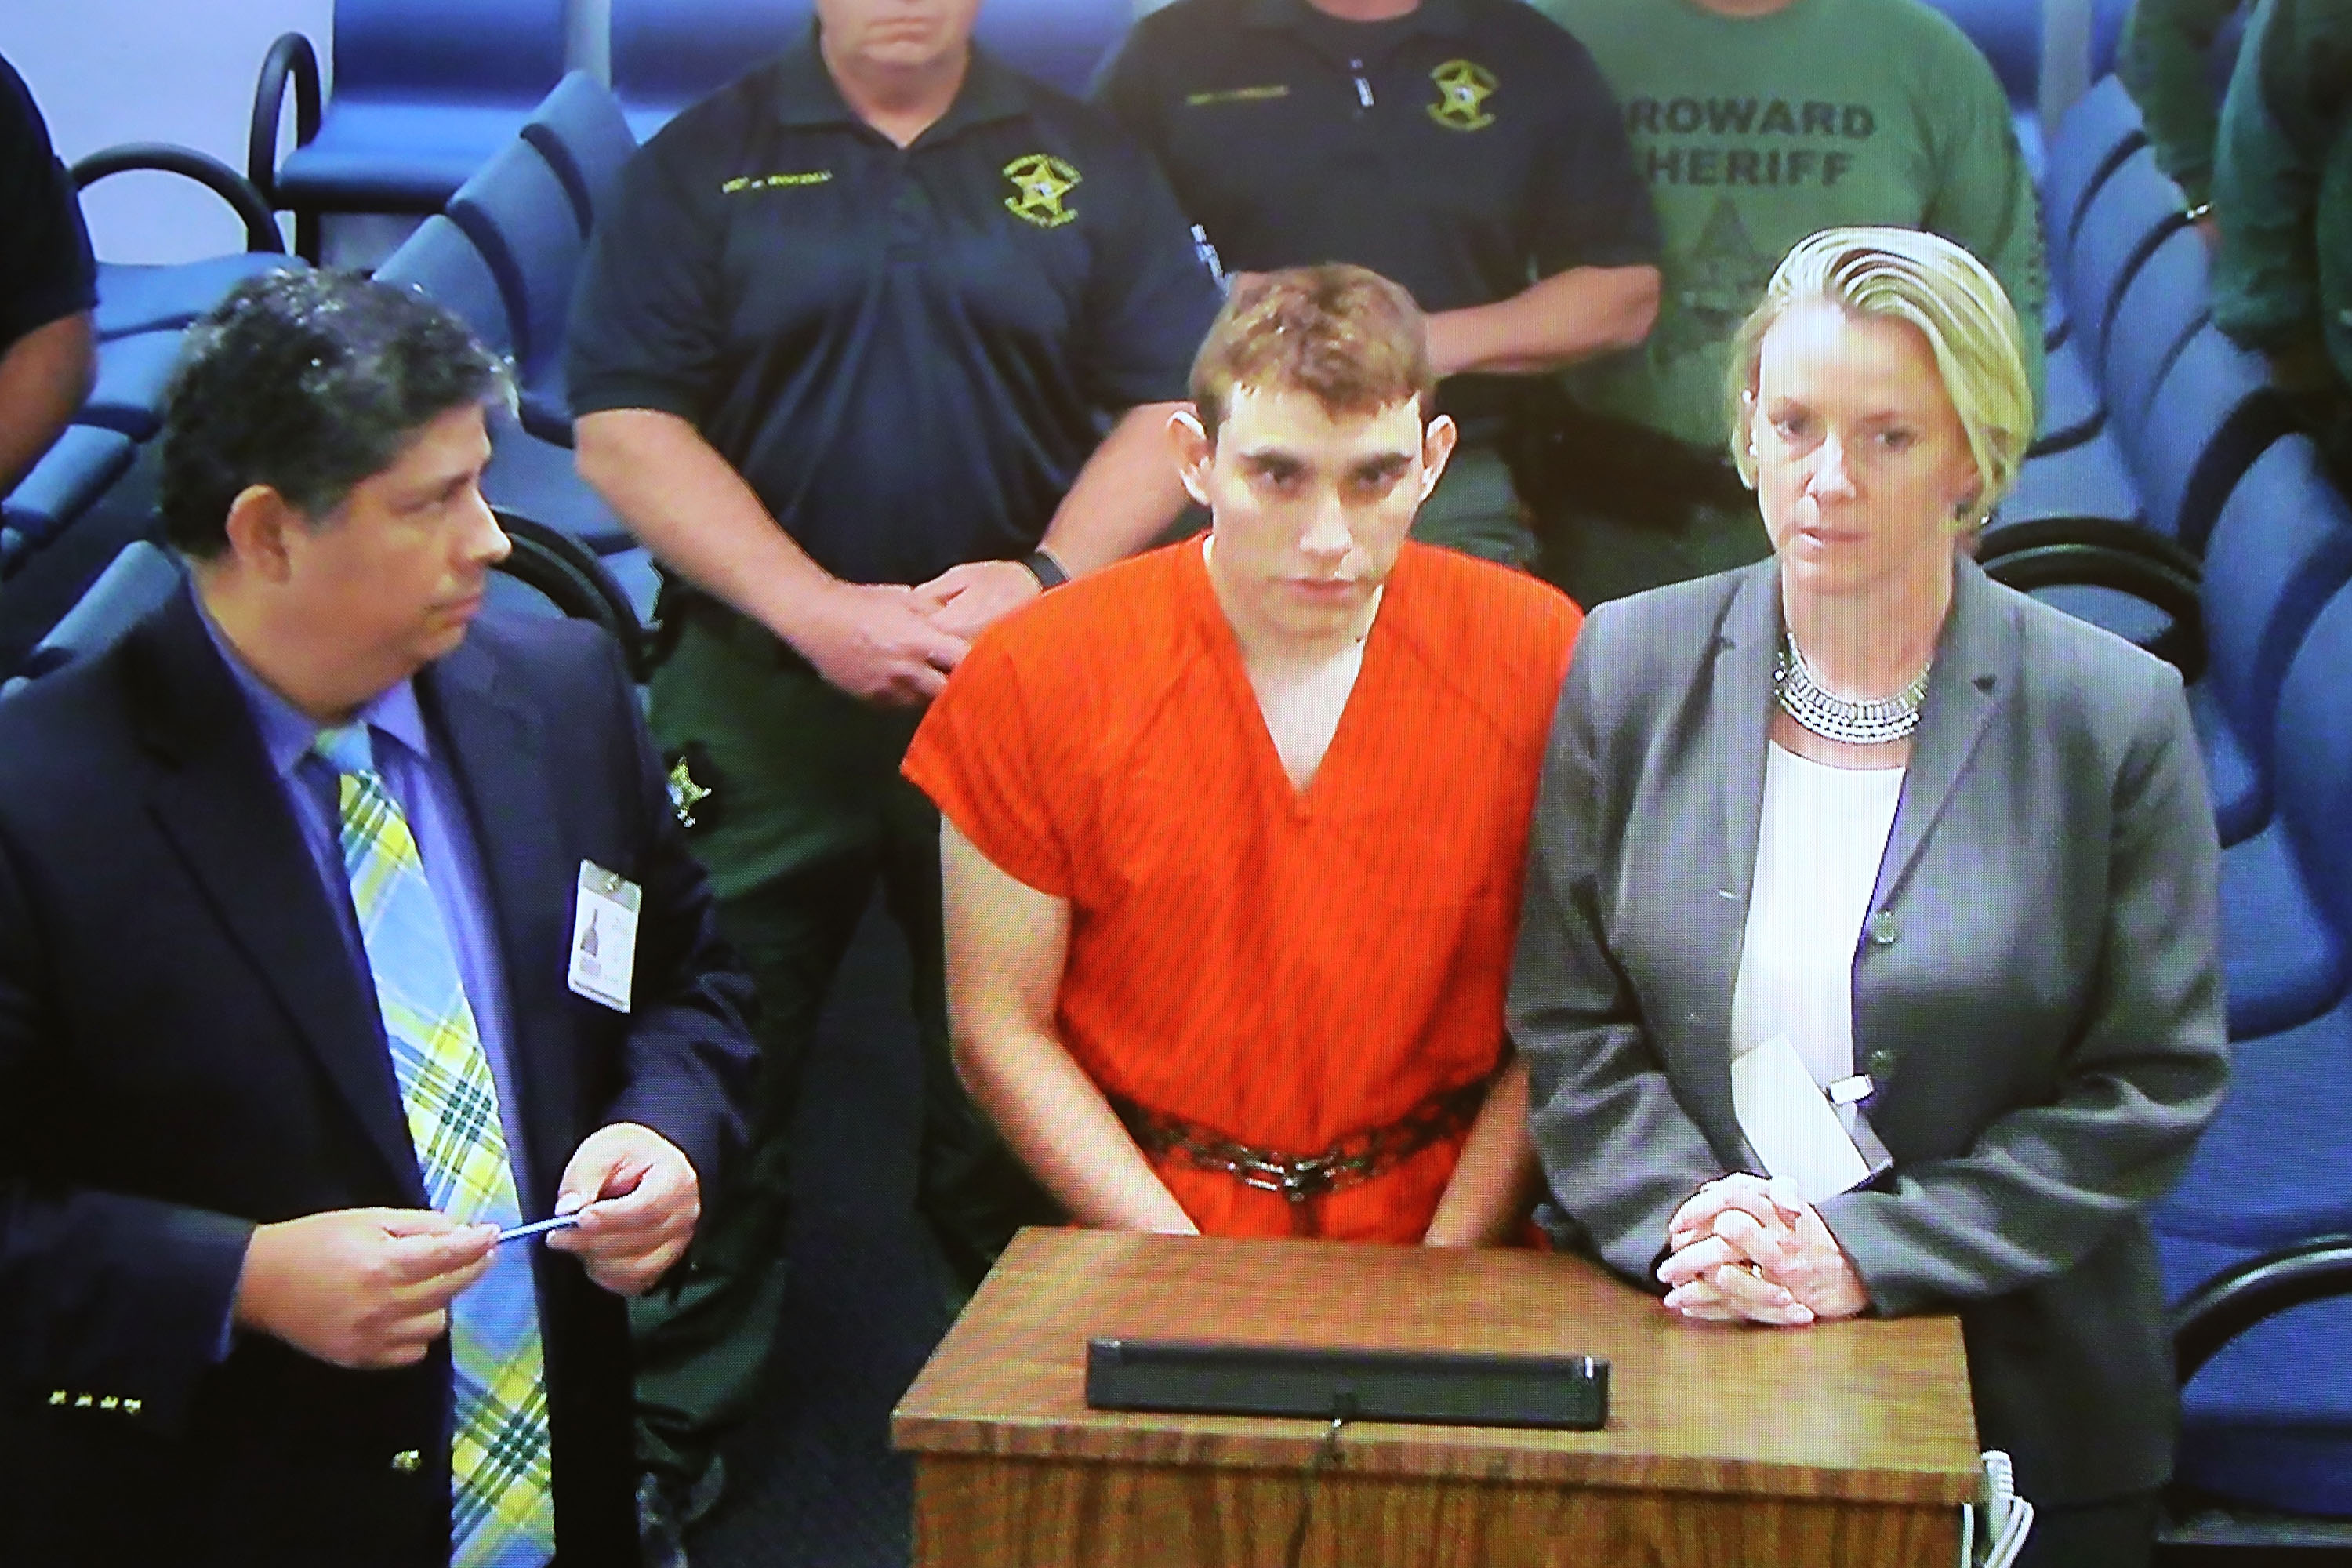 Nikolas Cruz, 19, a former student at Marjory Stoneman Douglas High School in Parkland, Florida, where he allegedly killed 17 people, is seen on a closed circuit television screen during a bond  hearing in front of Broward Judge Kim Mollica at the Broward County Courthouse on February 15, 2018 in Fort Lauderdale, Florida. Mr. Cruz is possibly facing 17 counts of premeditated murder in the school shooting. (Photo by Susan Stocker—Pool/Getty Images)